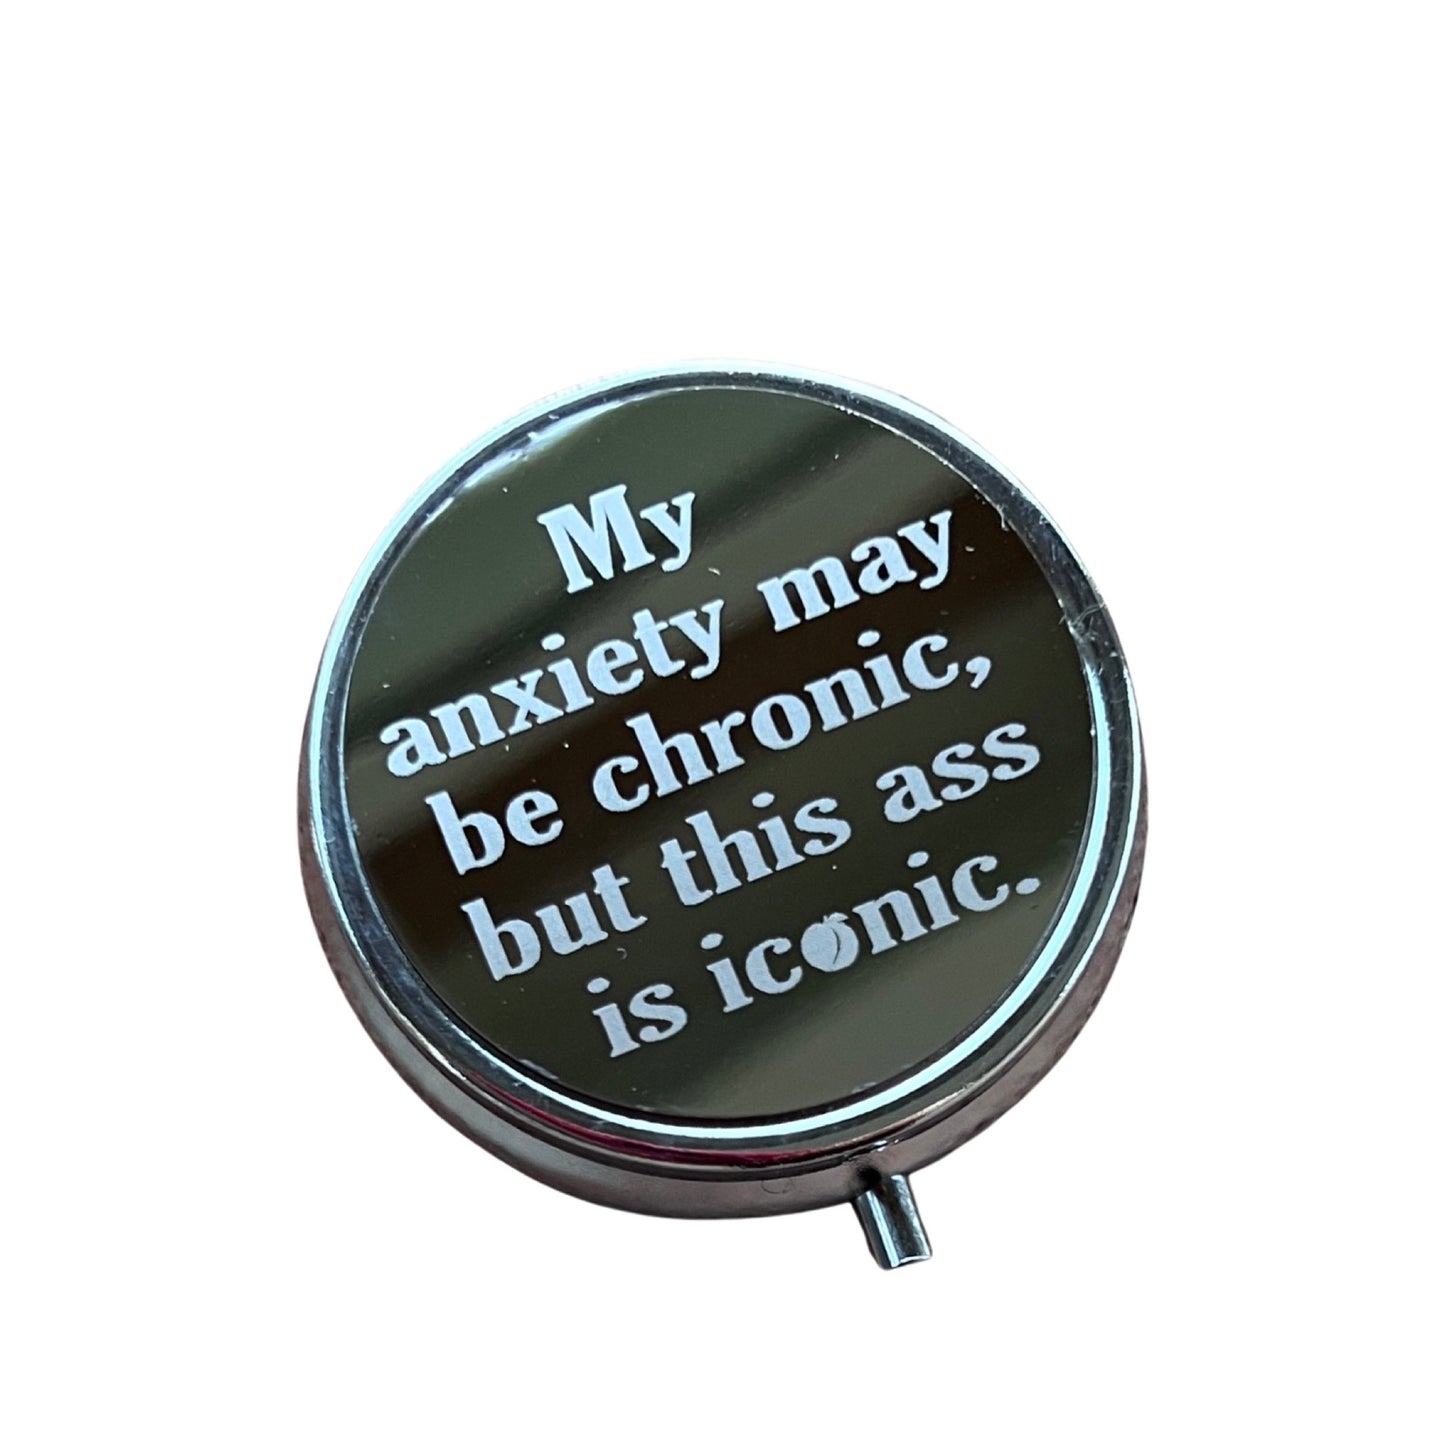 My anxiety may be chronic but this ass is iconic - Trinket | Medicine | Pill Box / Case